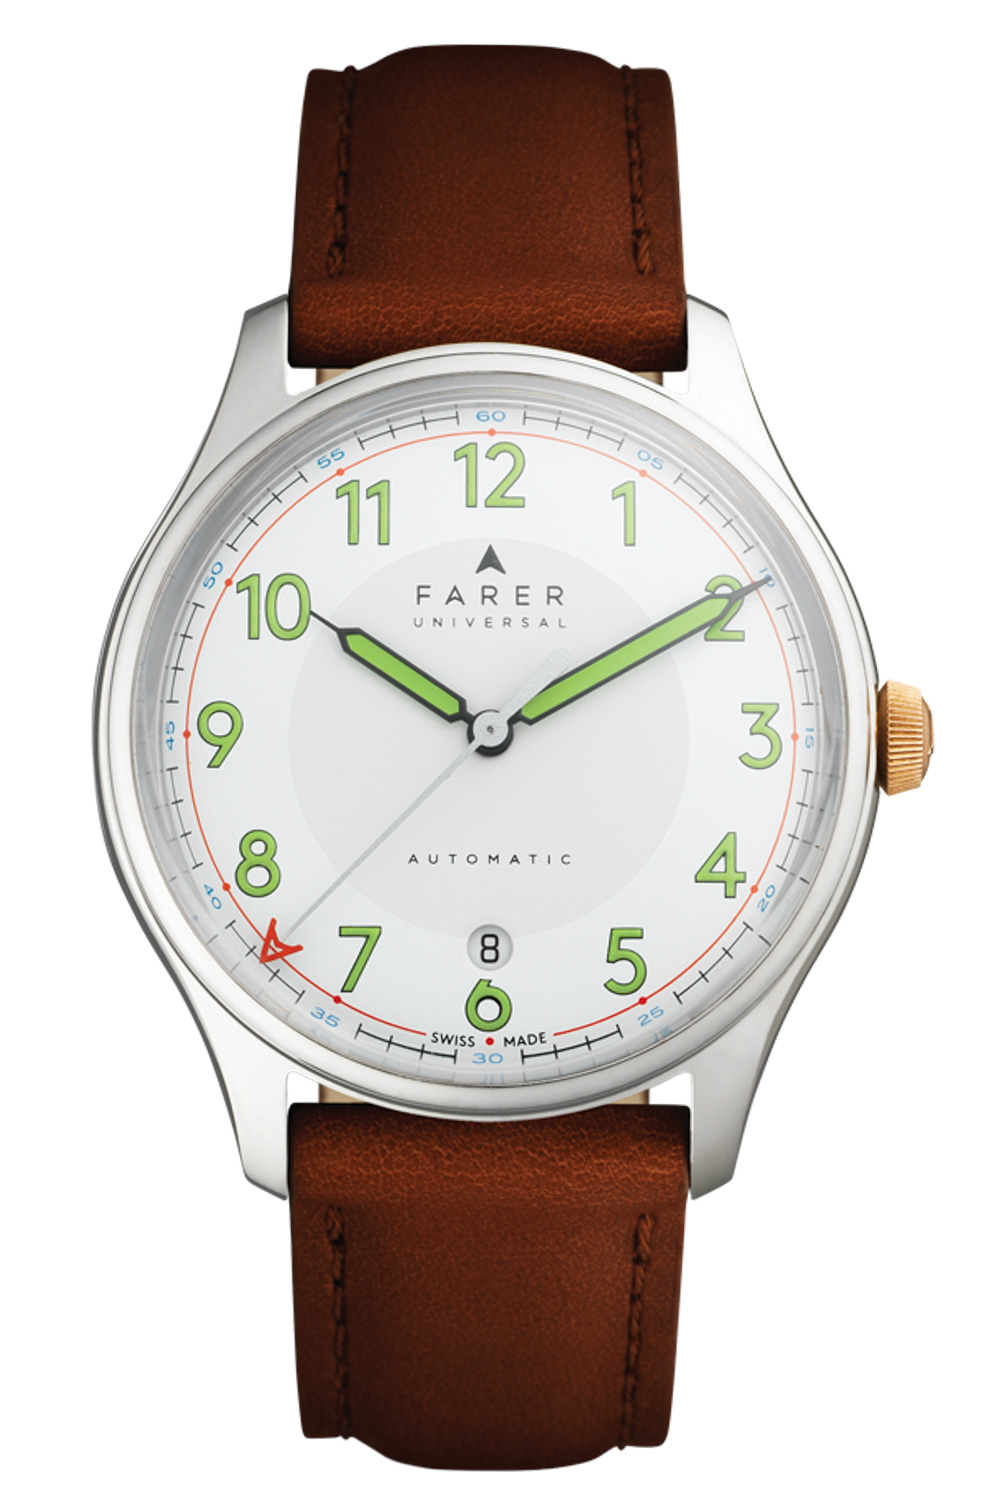 Farer 'Swiss Made' Automatic Watches From London With Unique Vintage Style Watch Releases 